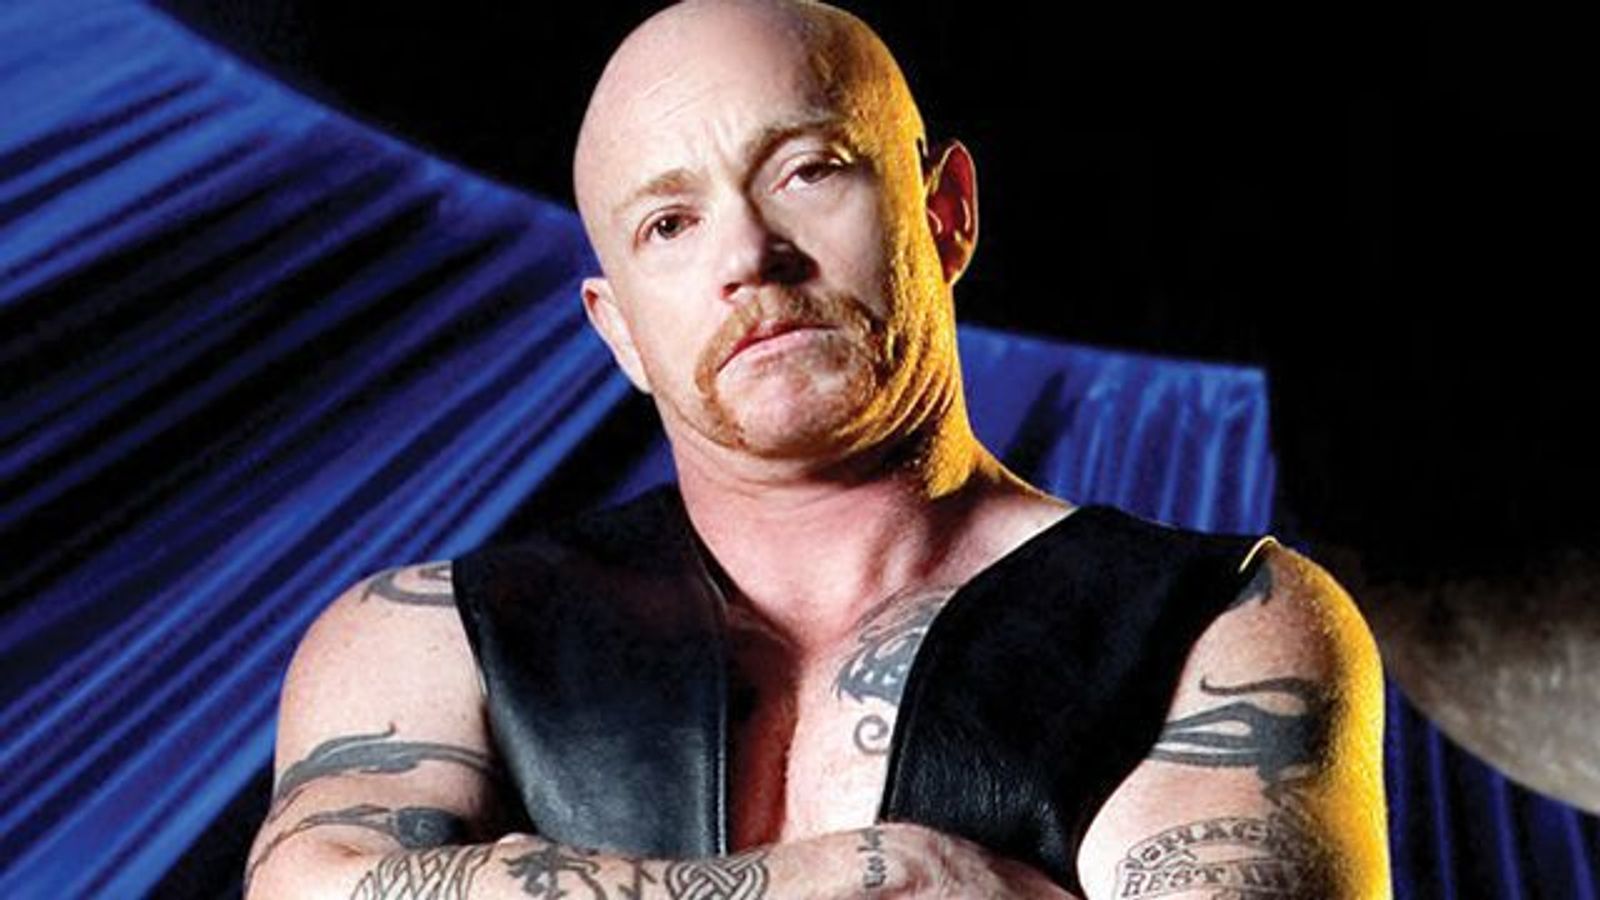 Buck Angel Releases Volume 2 of 'Sexing the Transman' Series